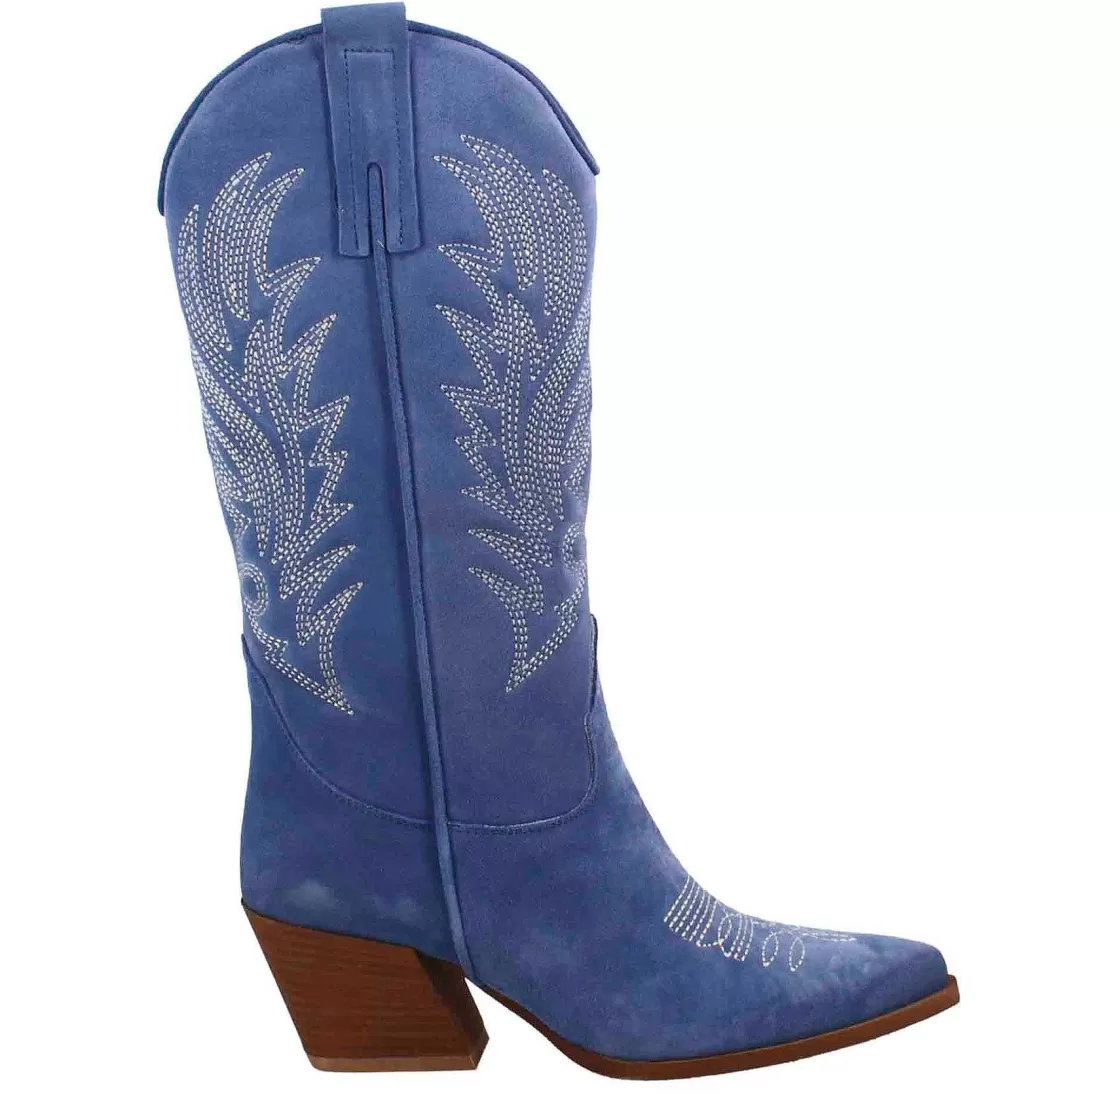 Leonardo Women'S Medium Texan Boots In Blue Suede With Embroidery. Best Sale